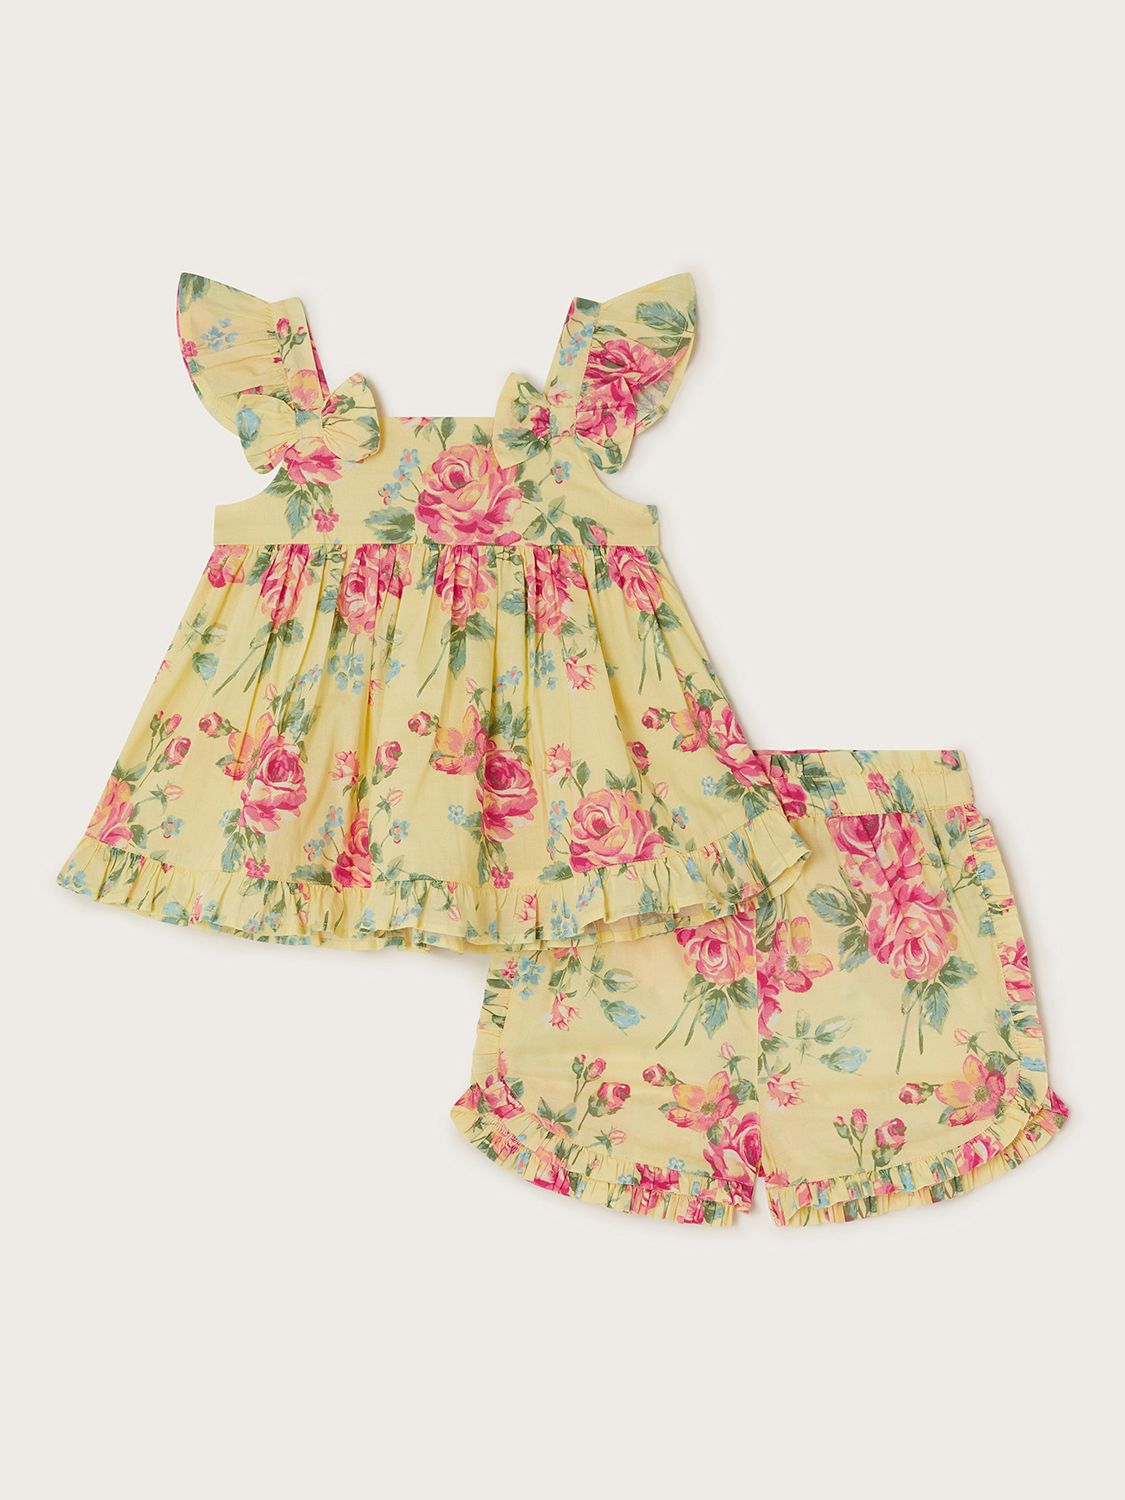 Monsoon Baby Floral Frill Top & Shorts Set, Yellow, 0-3 months